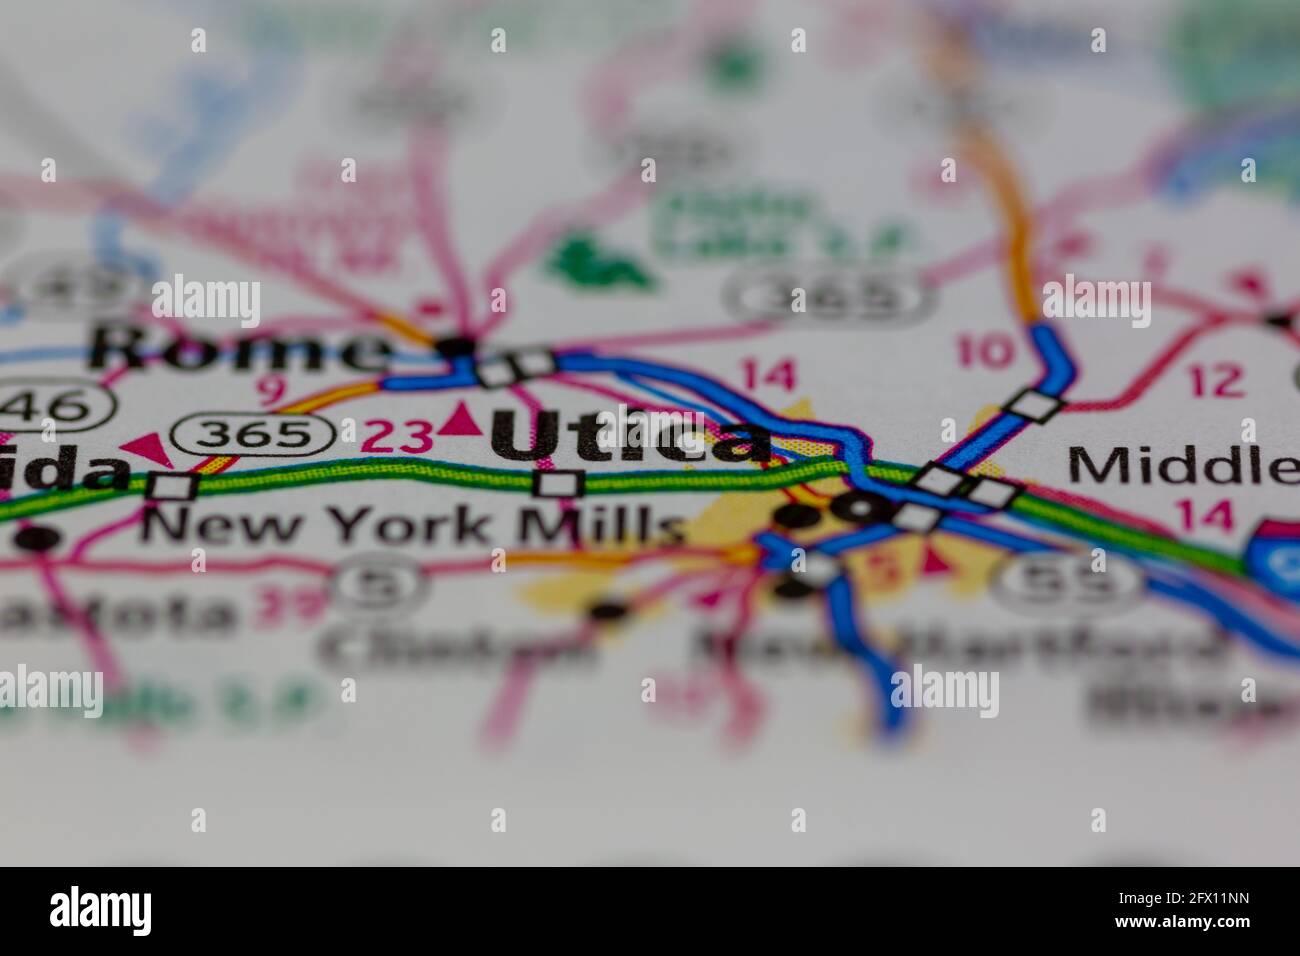 Utica New York USA Shown on a Geography map or road map Stock Photo